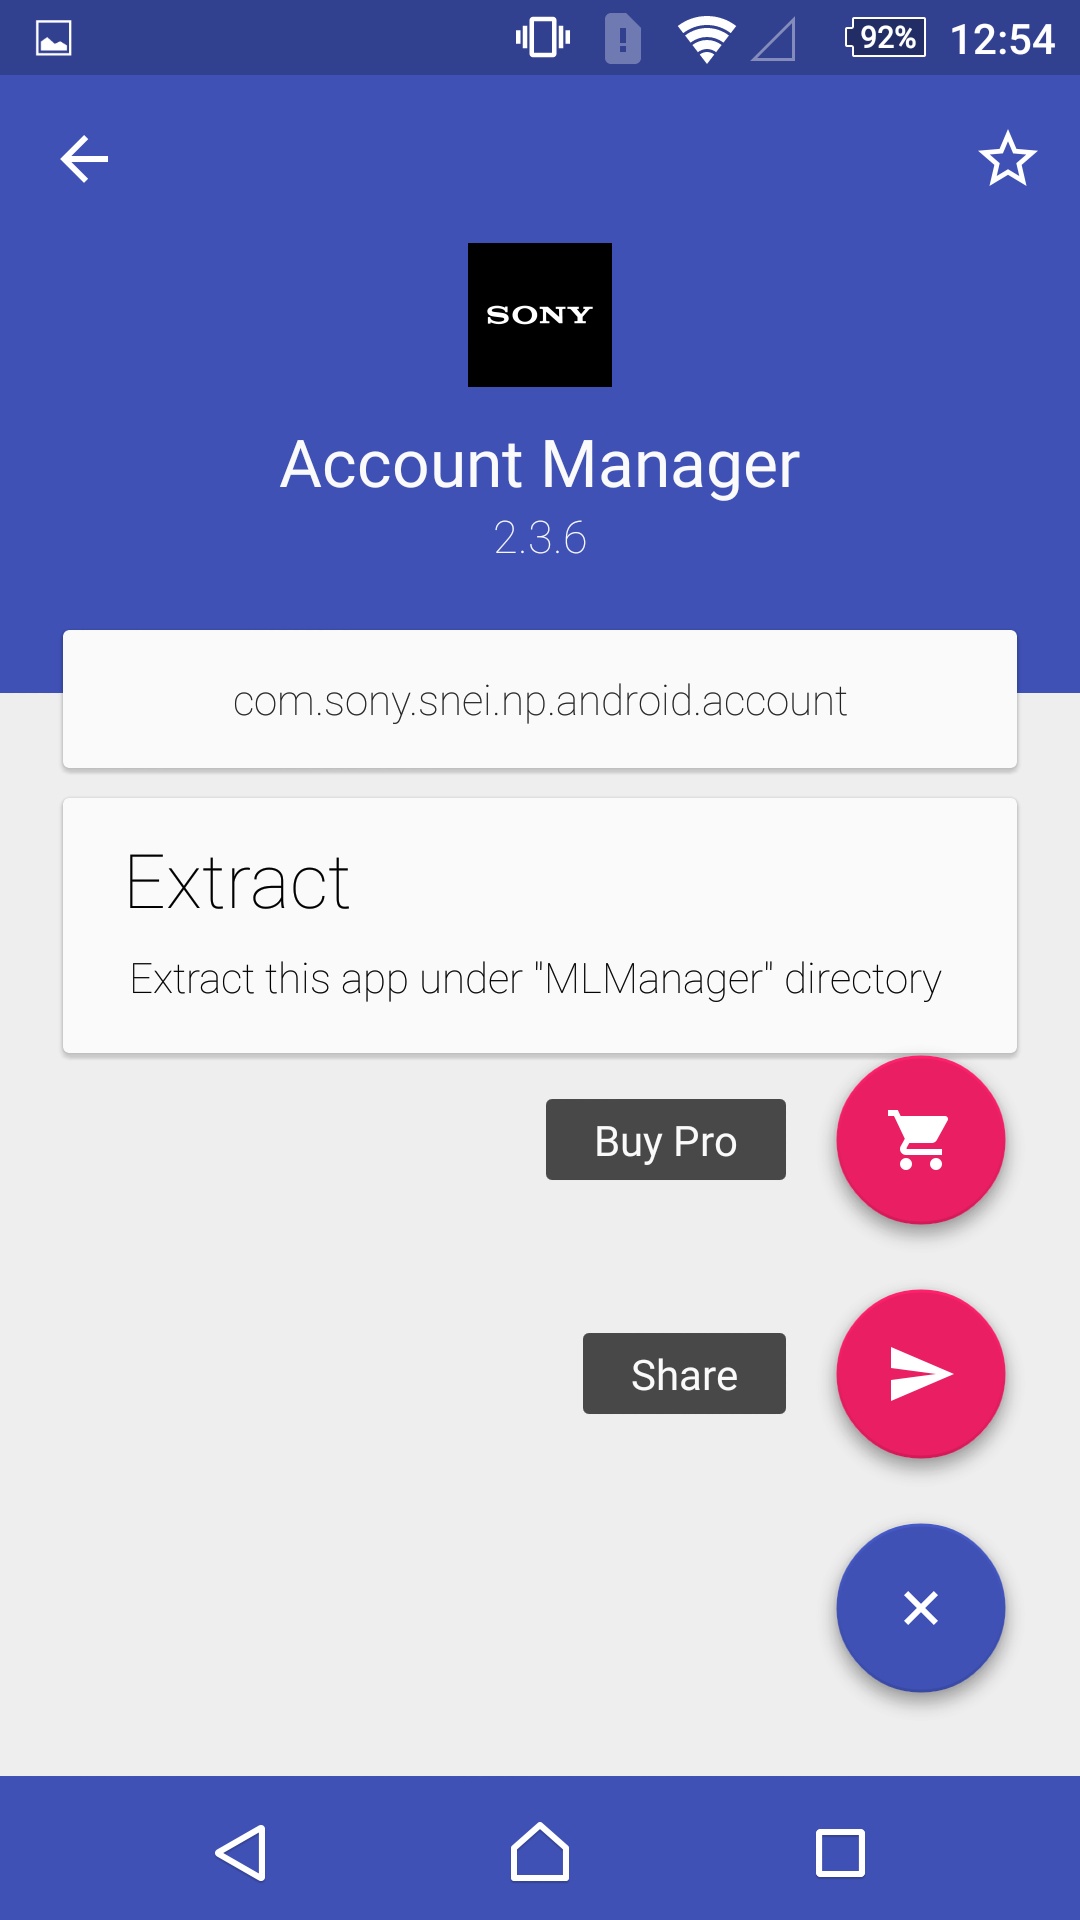   ML Manager    